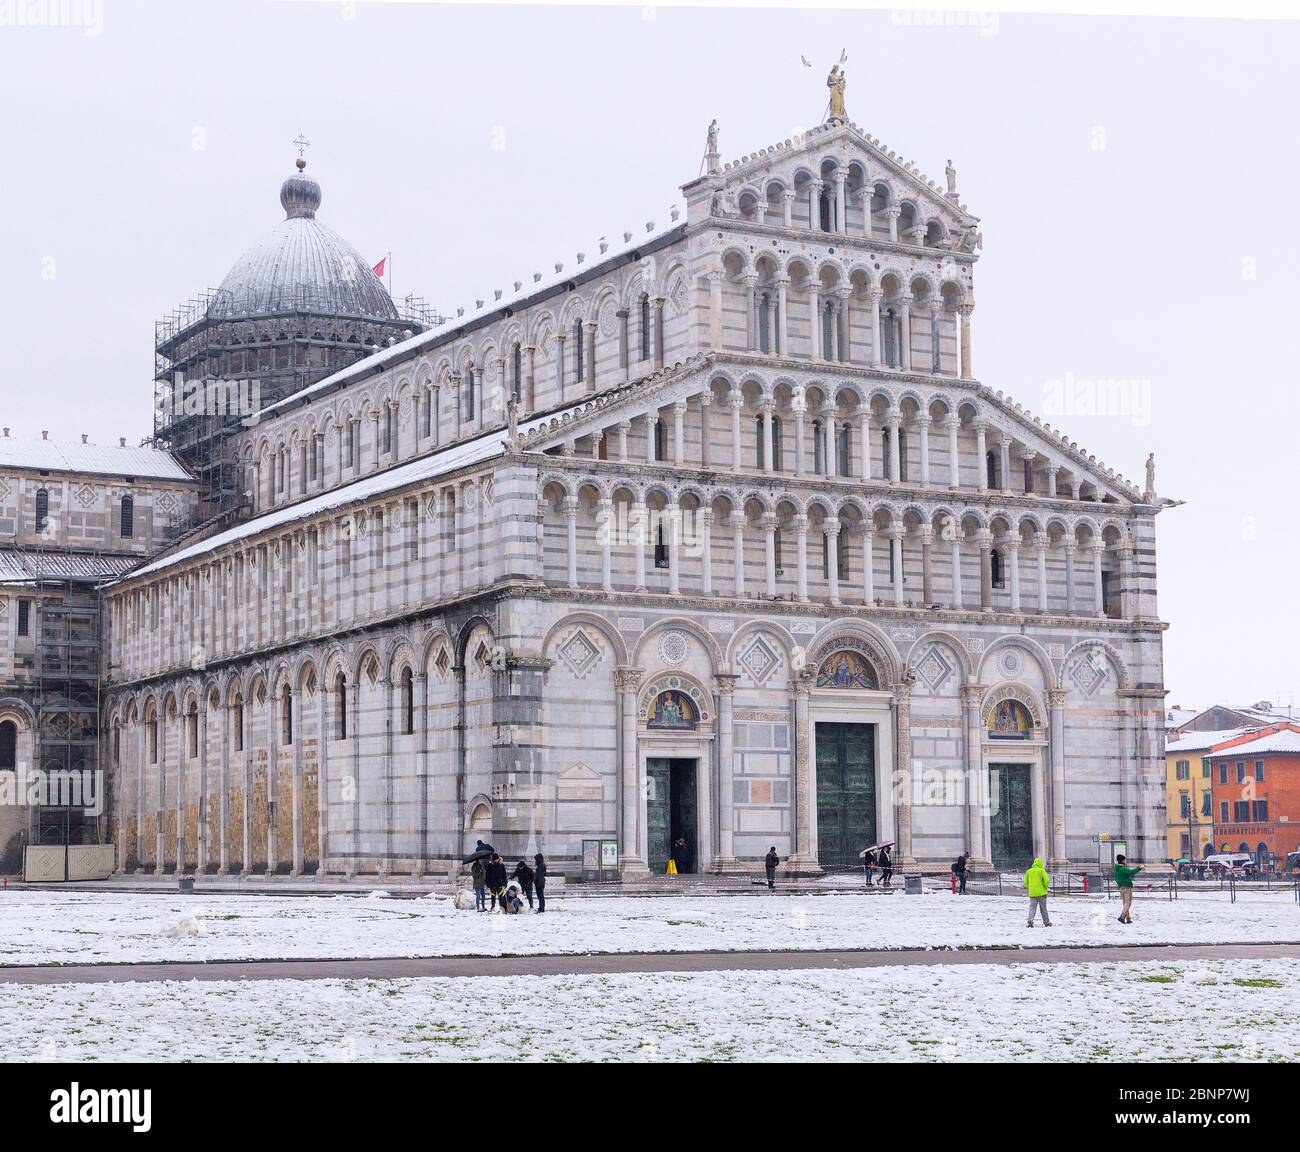 Pisa Cathedral in a snowy day, Campo dei Miracoli, Pisa, Tuscany, Italy, Europe Stock Photo